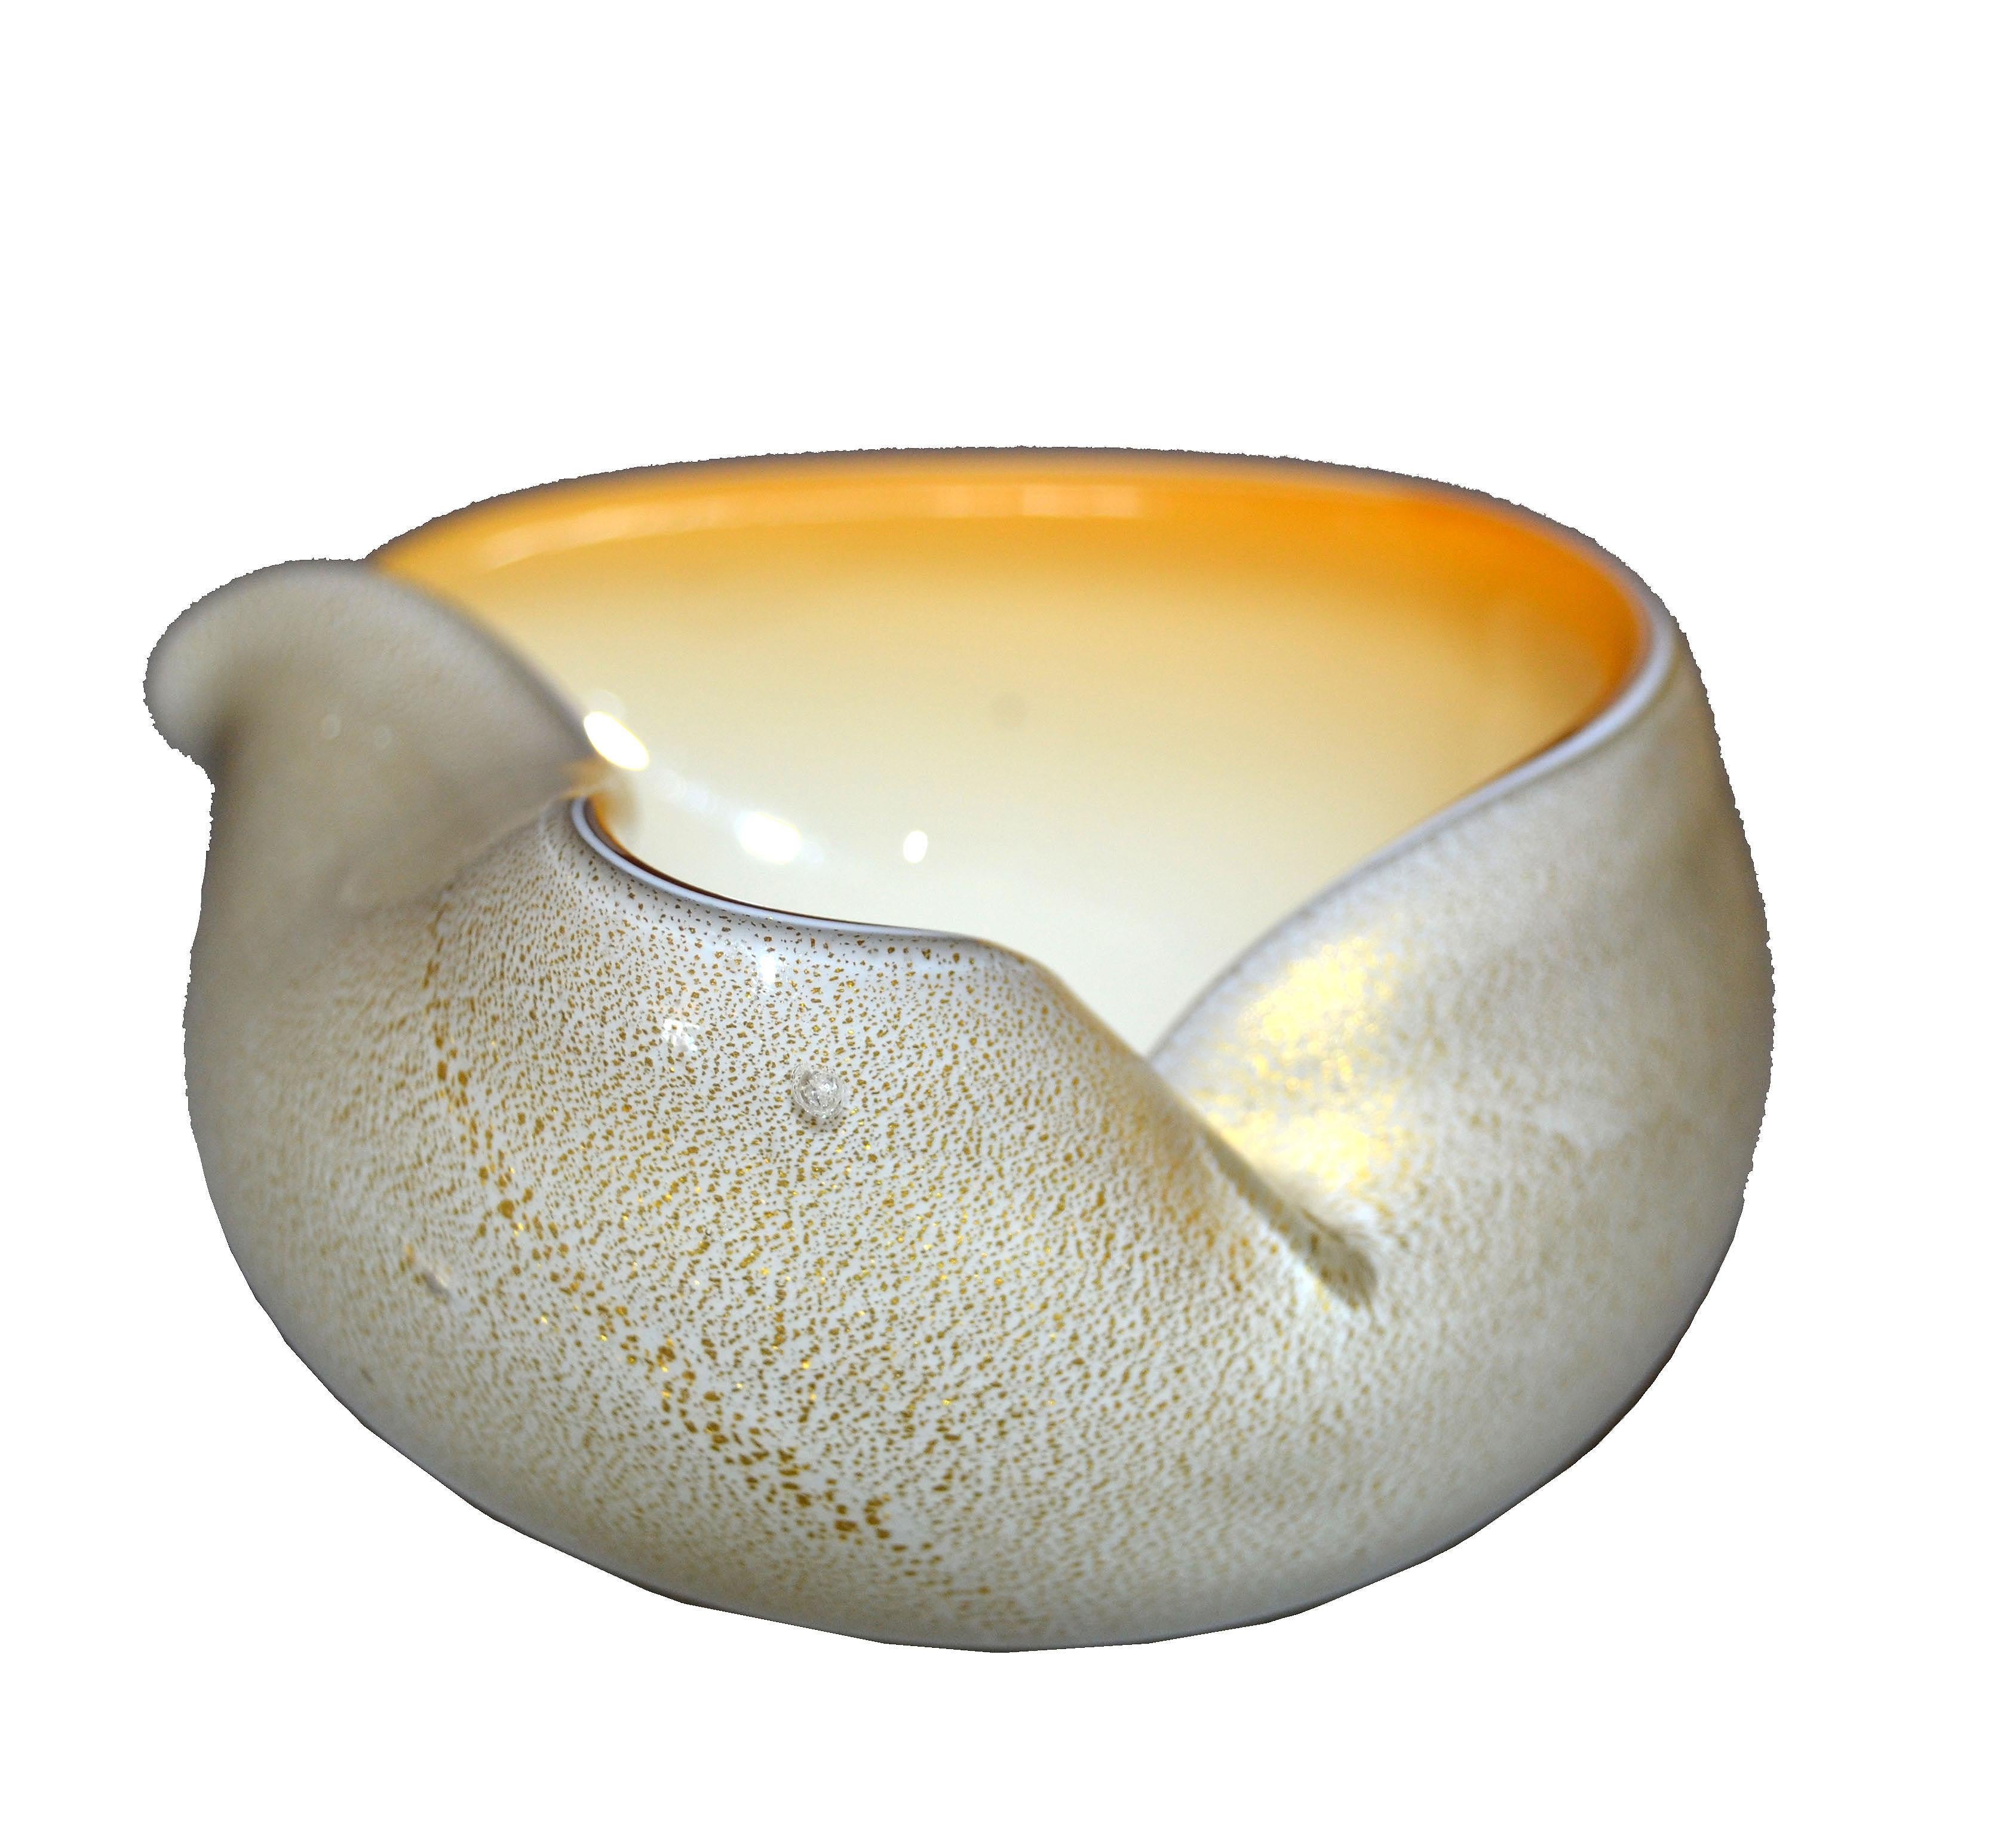 Mid-20th Century Murano Art Glass Beige & Gold Flecks Catchall, Bowl Inspired by Alfredo Barbini For Sale